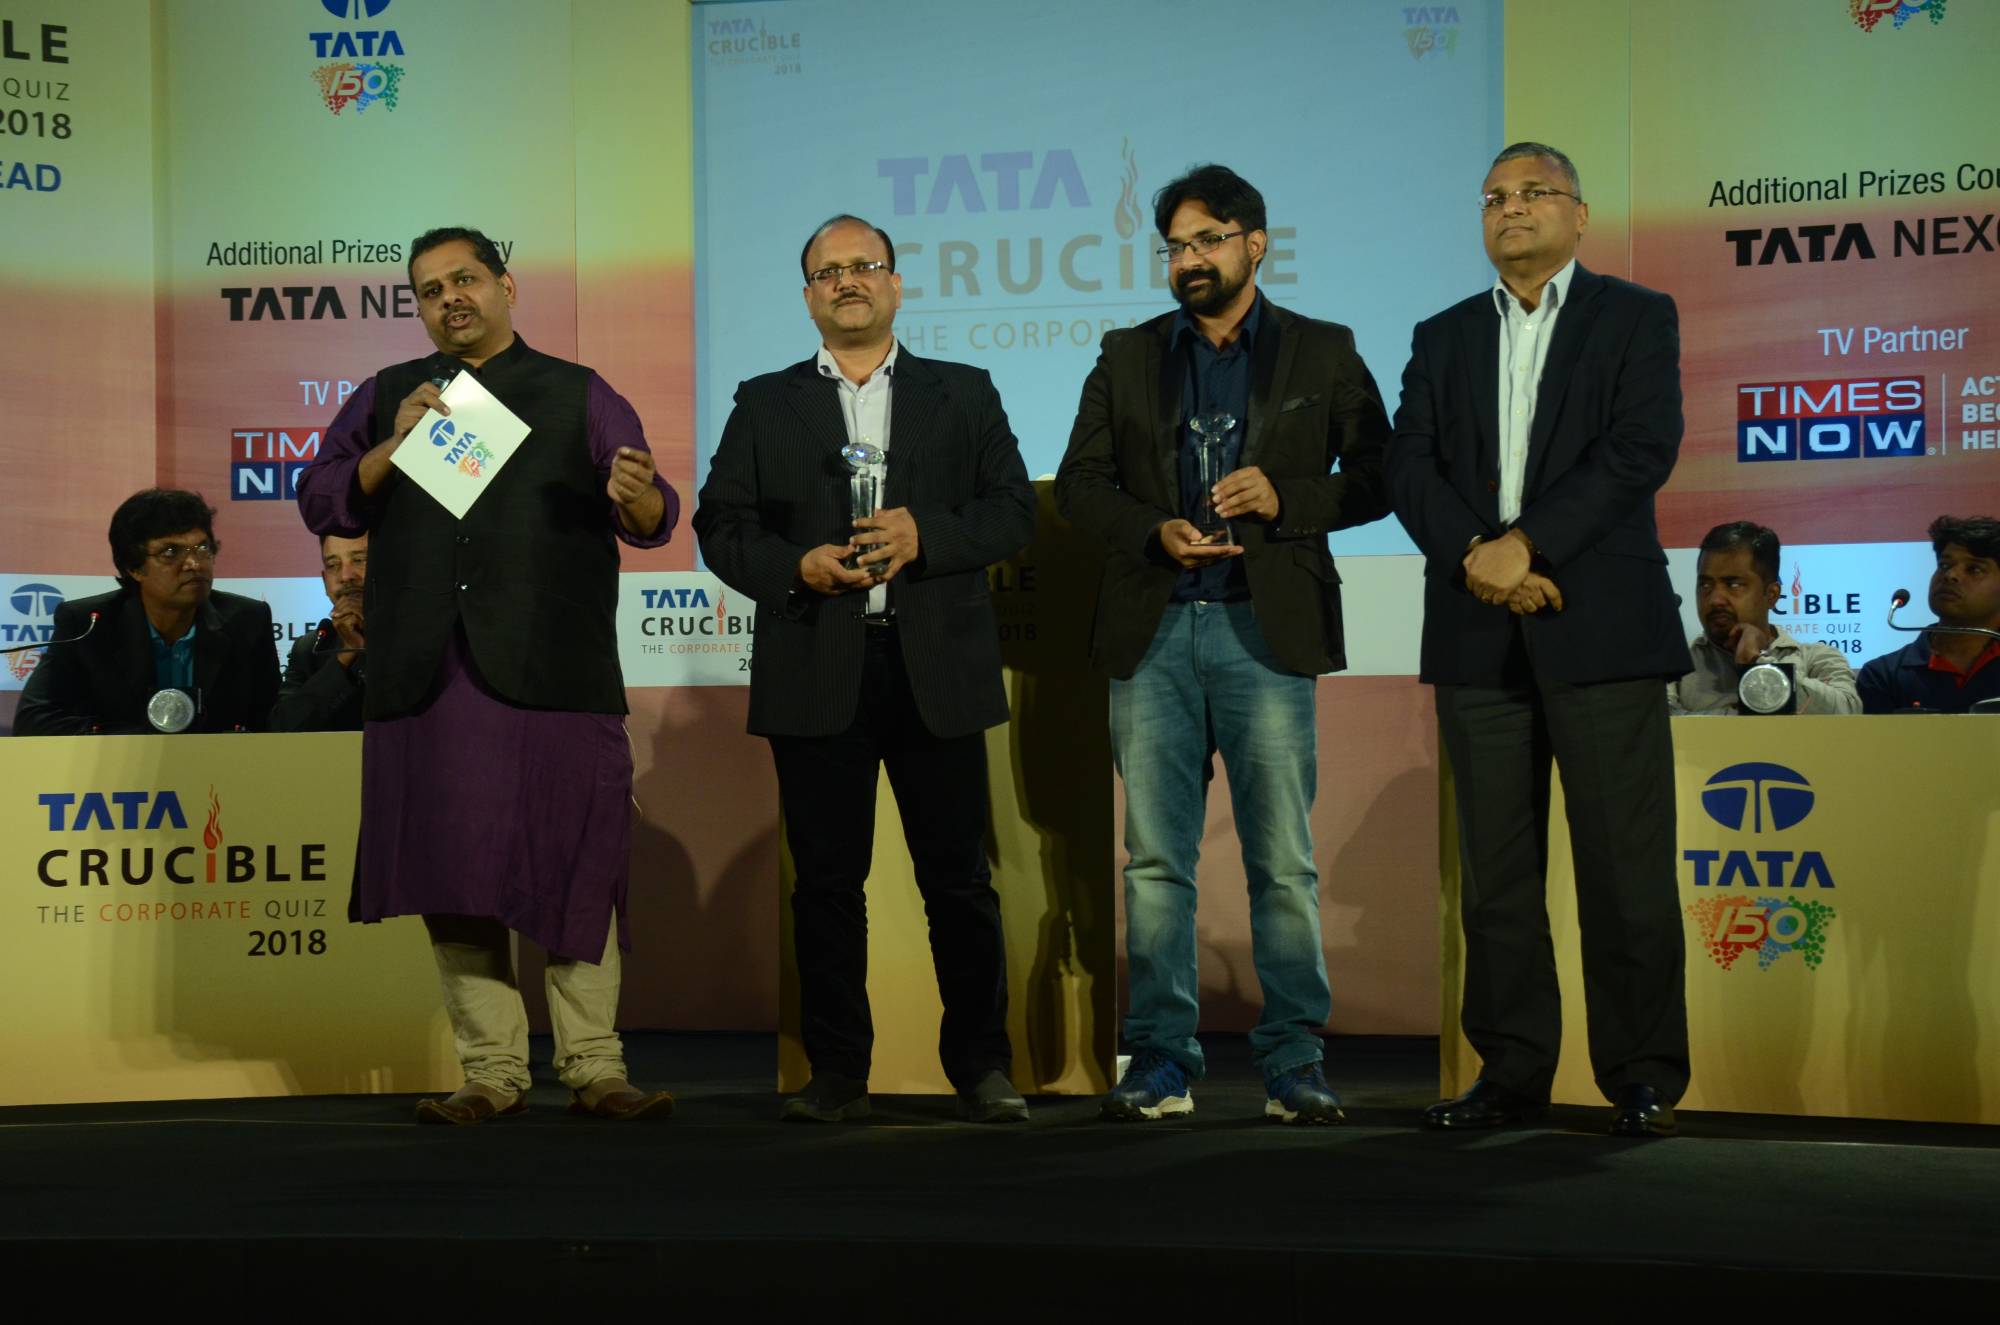 Tata Crucible Corporate Quiz Results For Winners - SAIL 